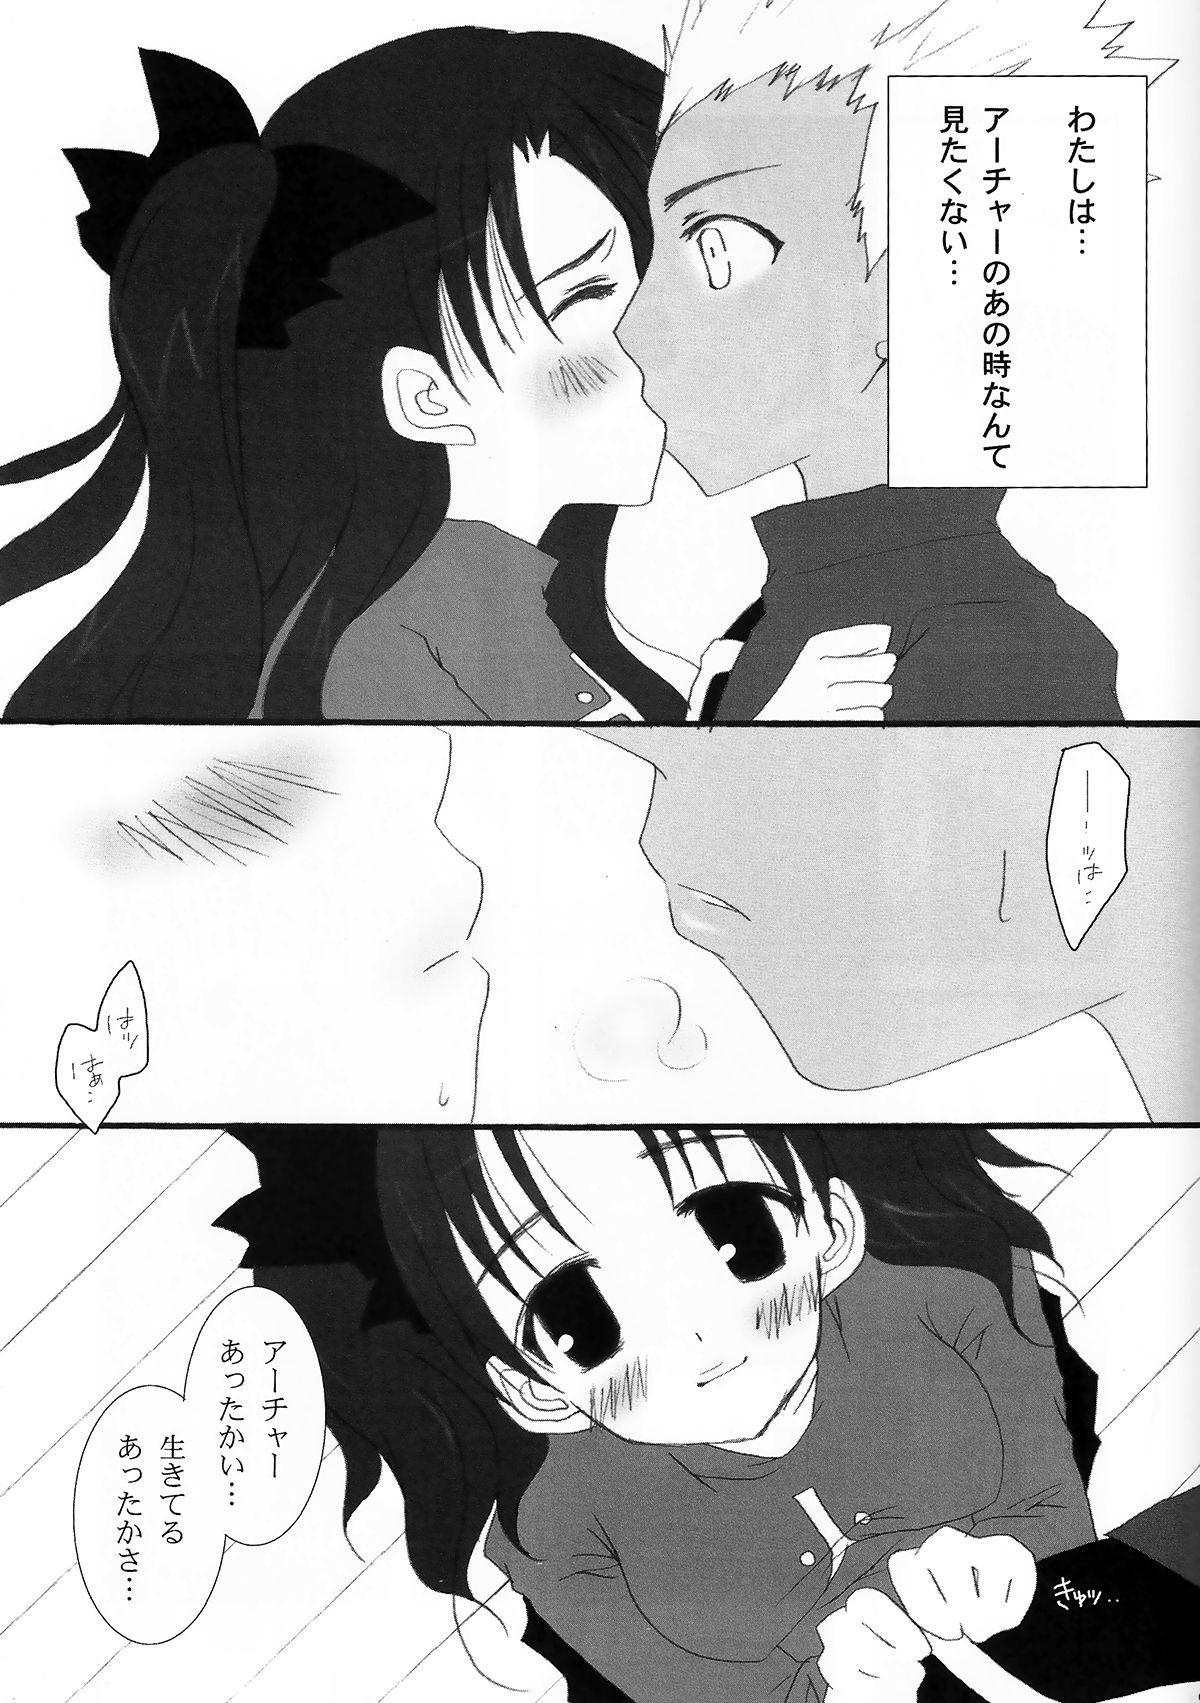 Rimming RELATION - Fate stay night Flexible - Page 7